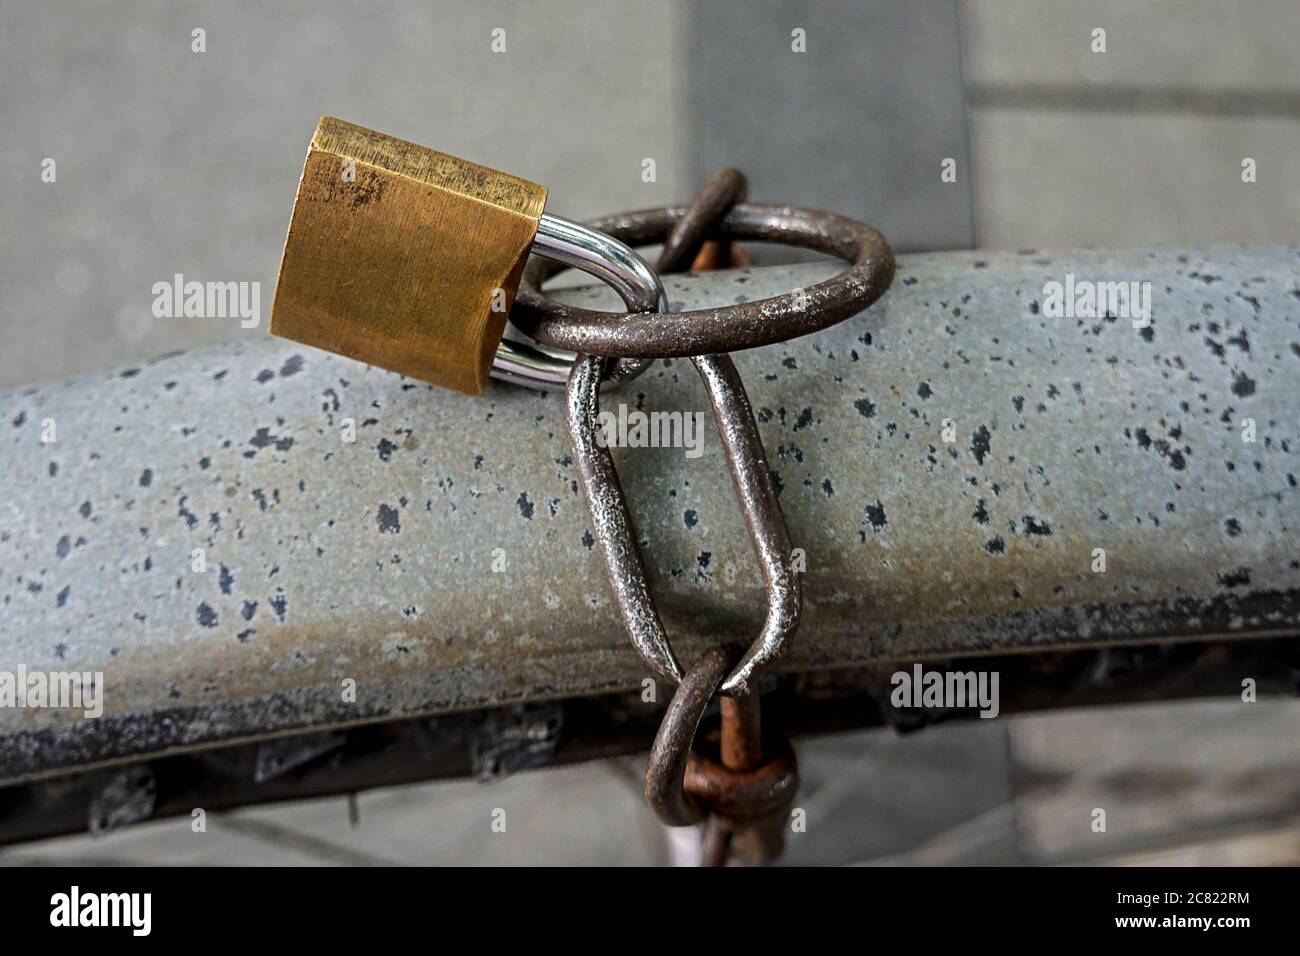 close up of a golden colred lock with rusty chain Stock Photo